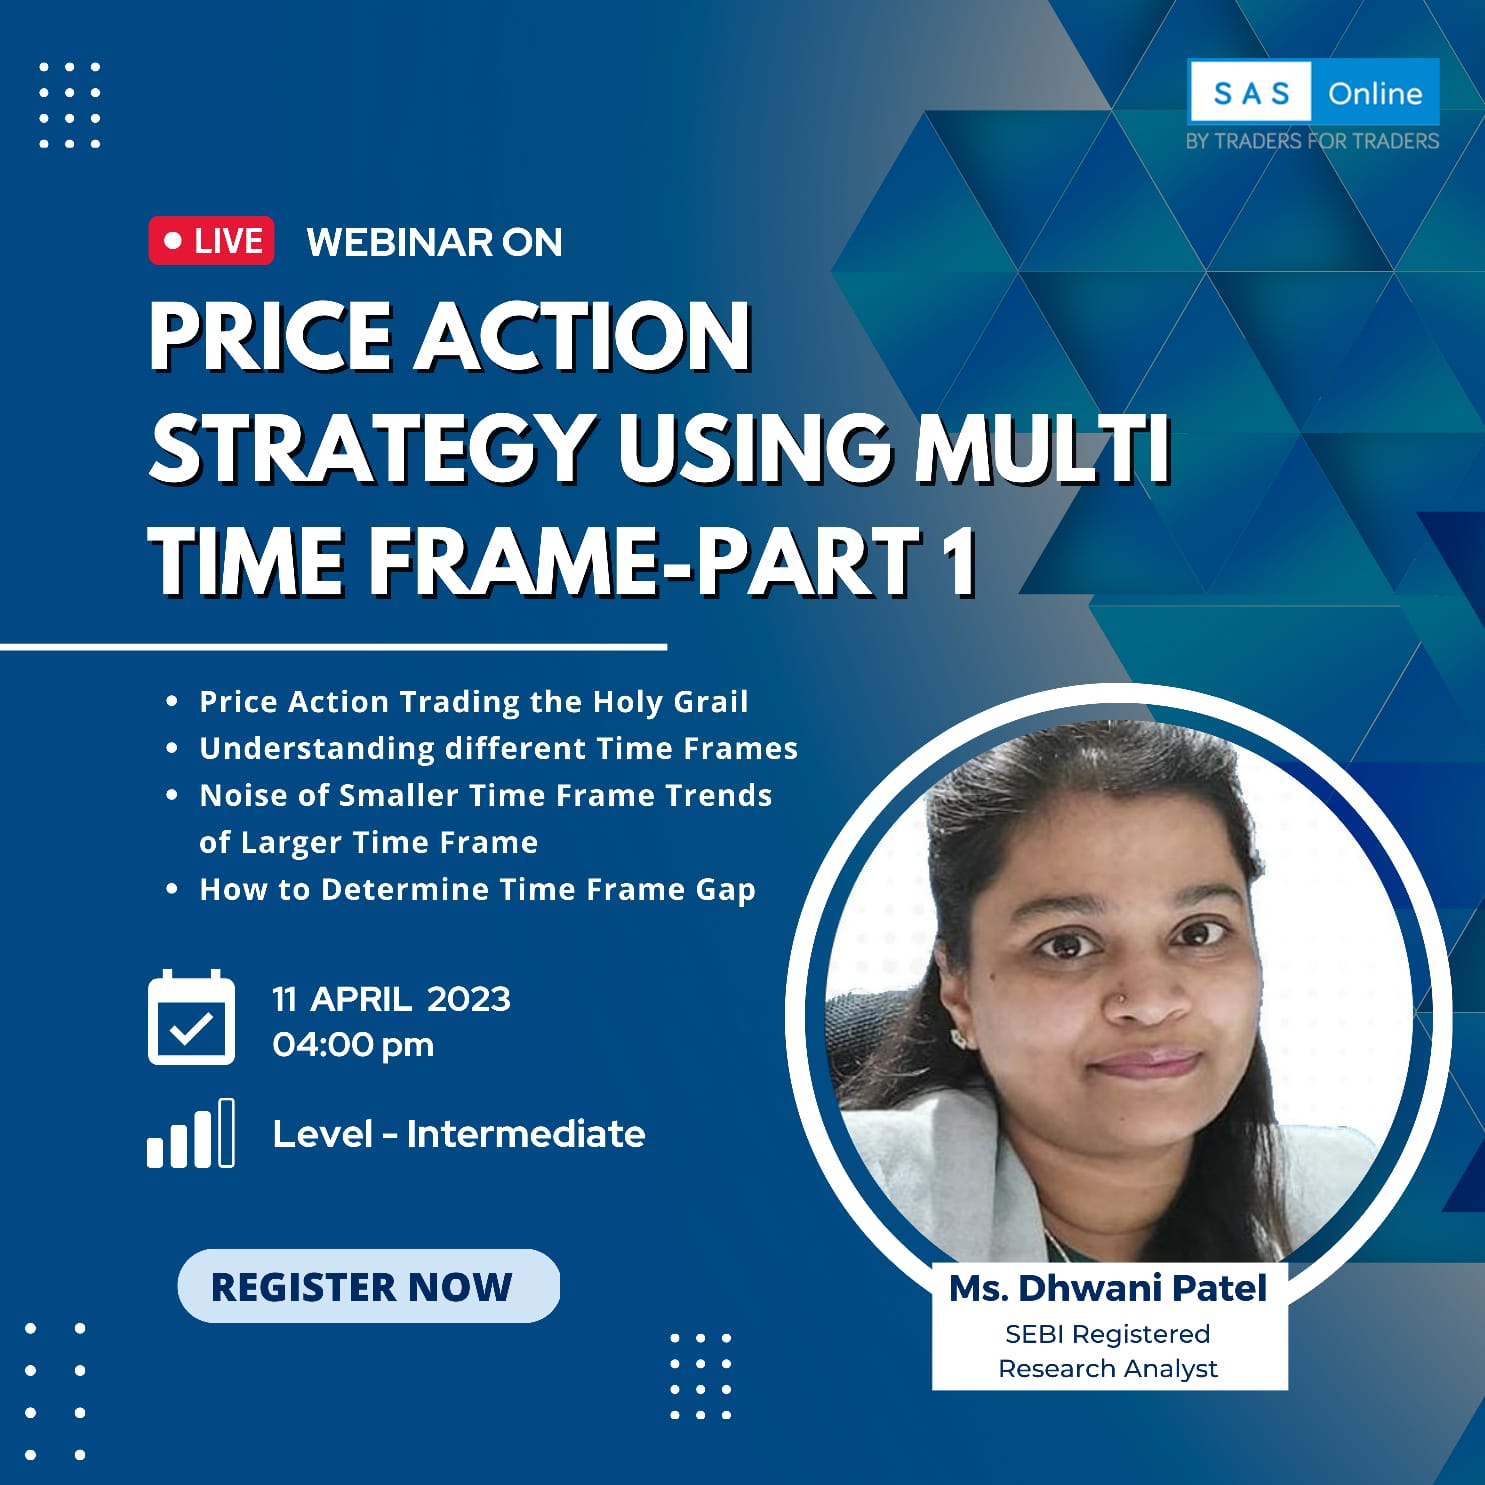 Price Action Strategy using Multi Time Frame - Part 1